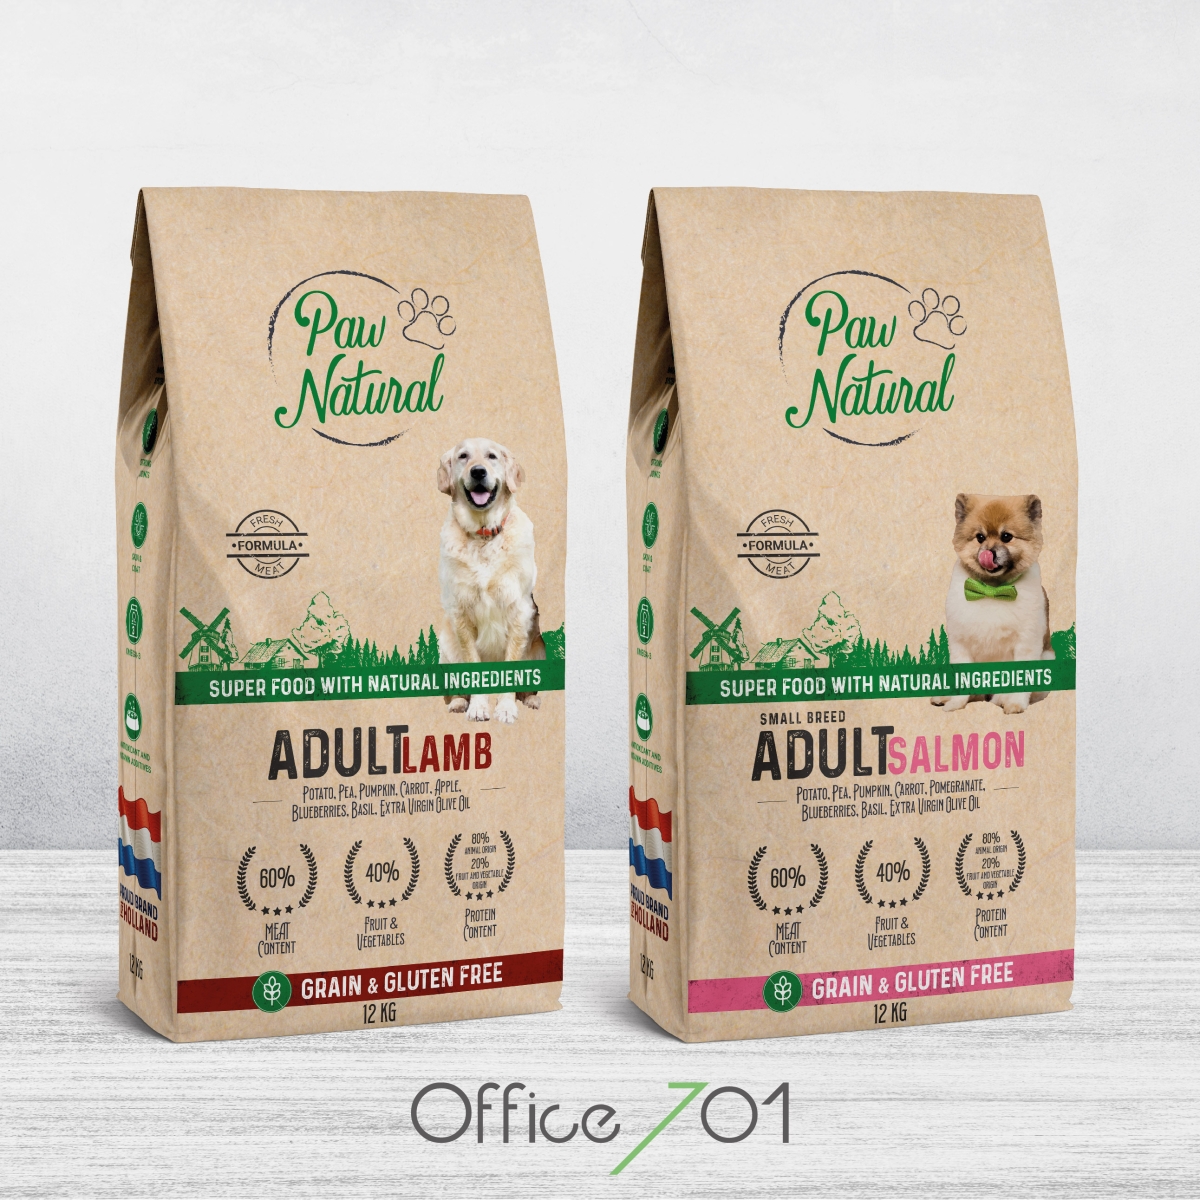 Office701 | Paw Natural Pet Food Packaging Design